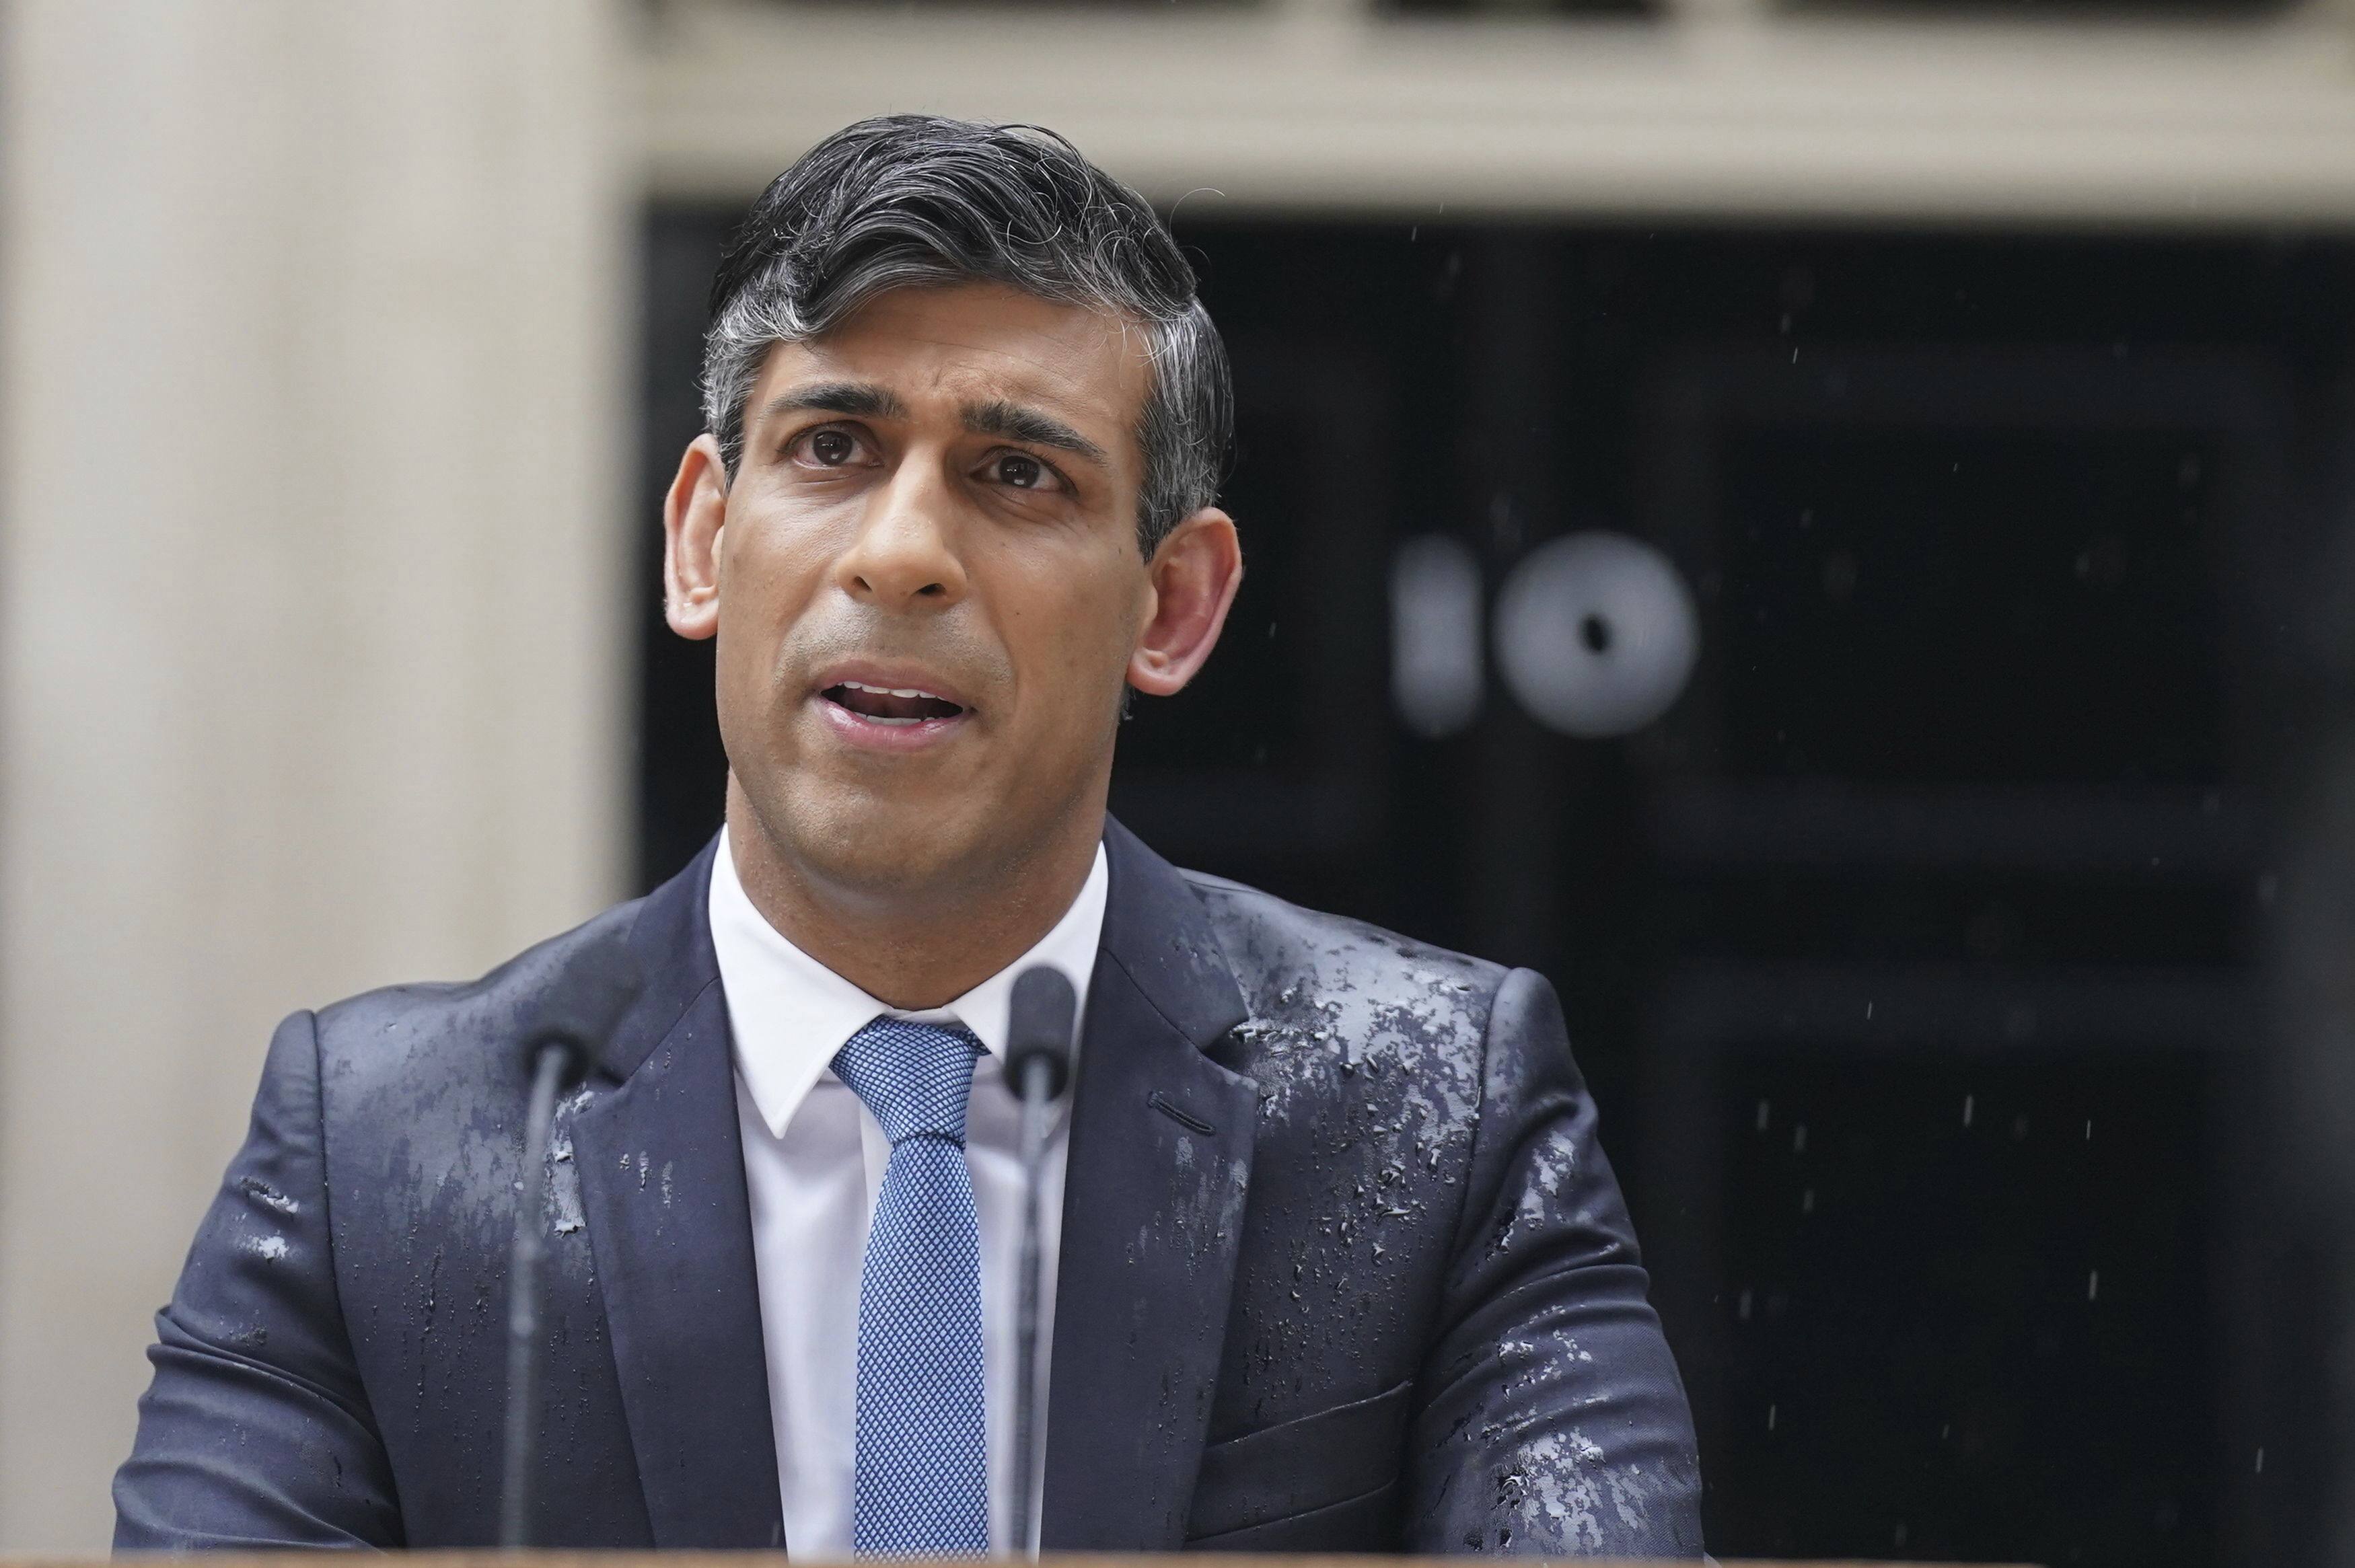 British Prime Minister Rishi Sunak delivers a speech outside No 10 Downing Street in London on Wednesday. Photo: PA via AP